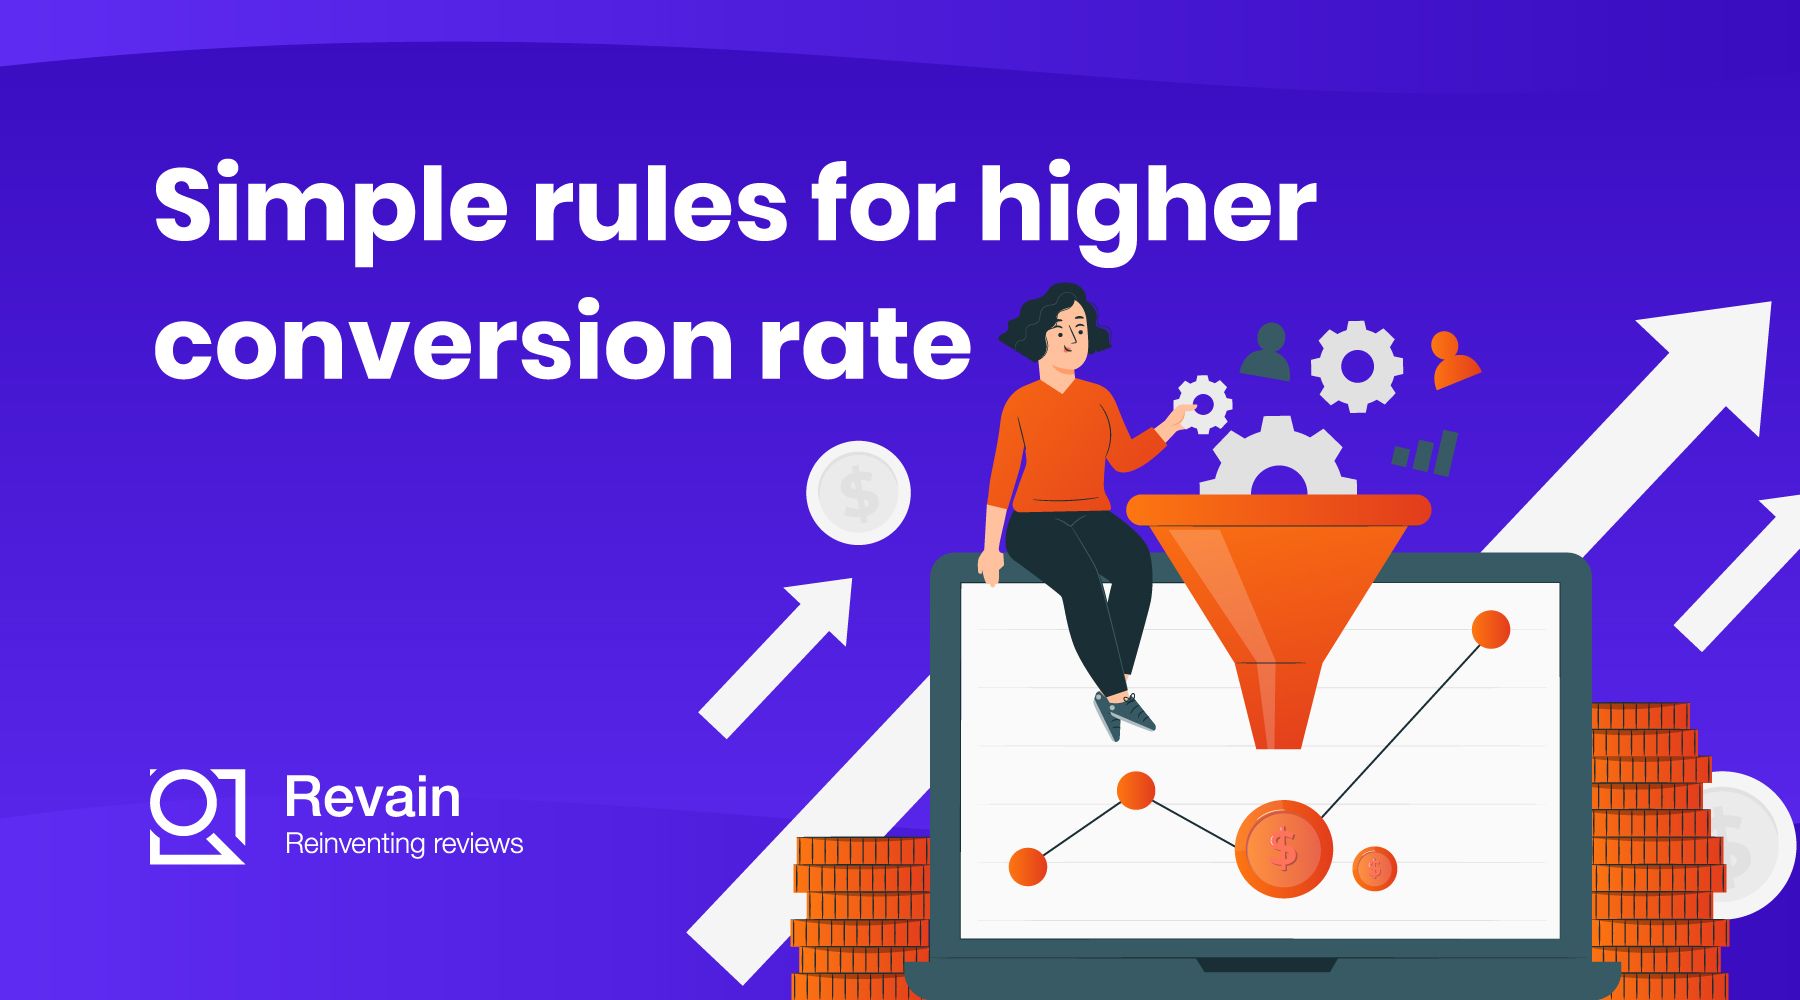 Simple rules for higher conversion rate